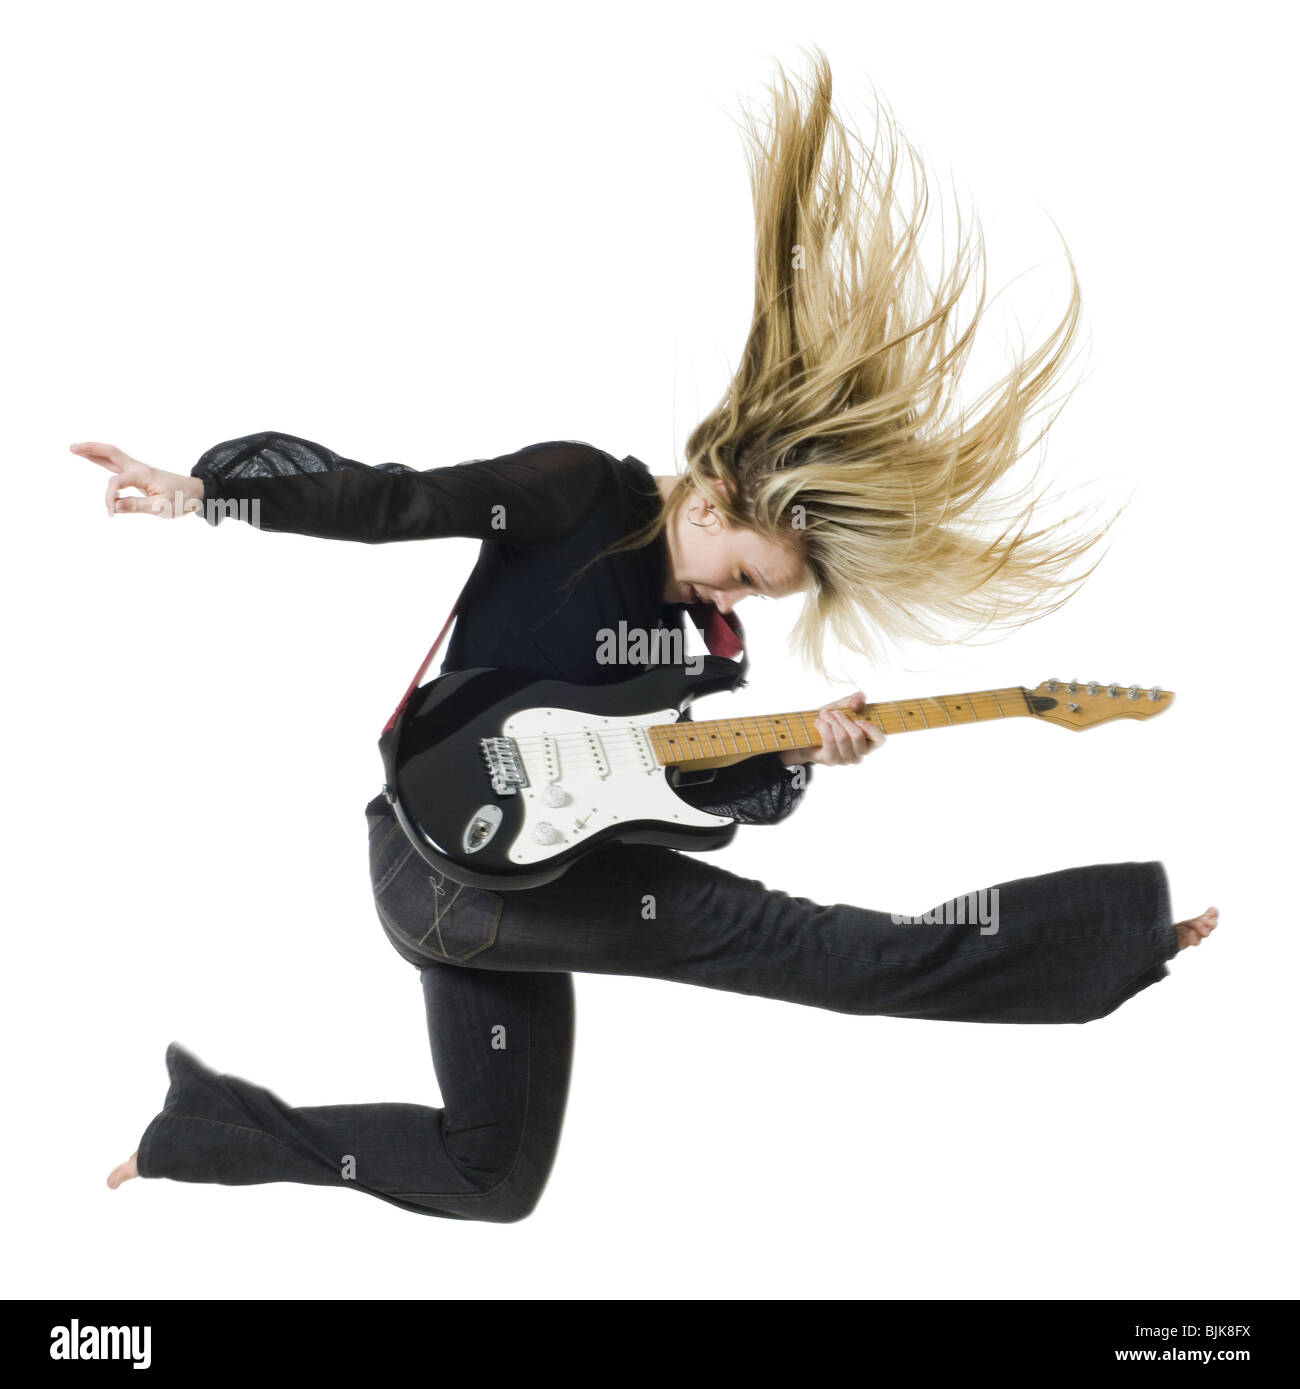 Profile of woman jumping with electric guitar Stock Photo